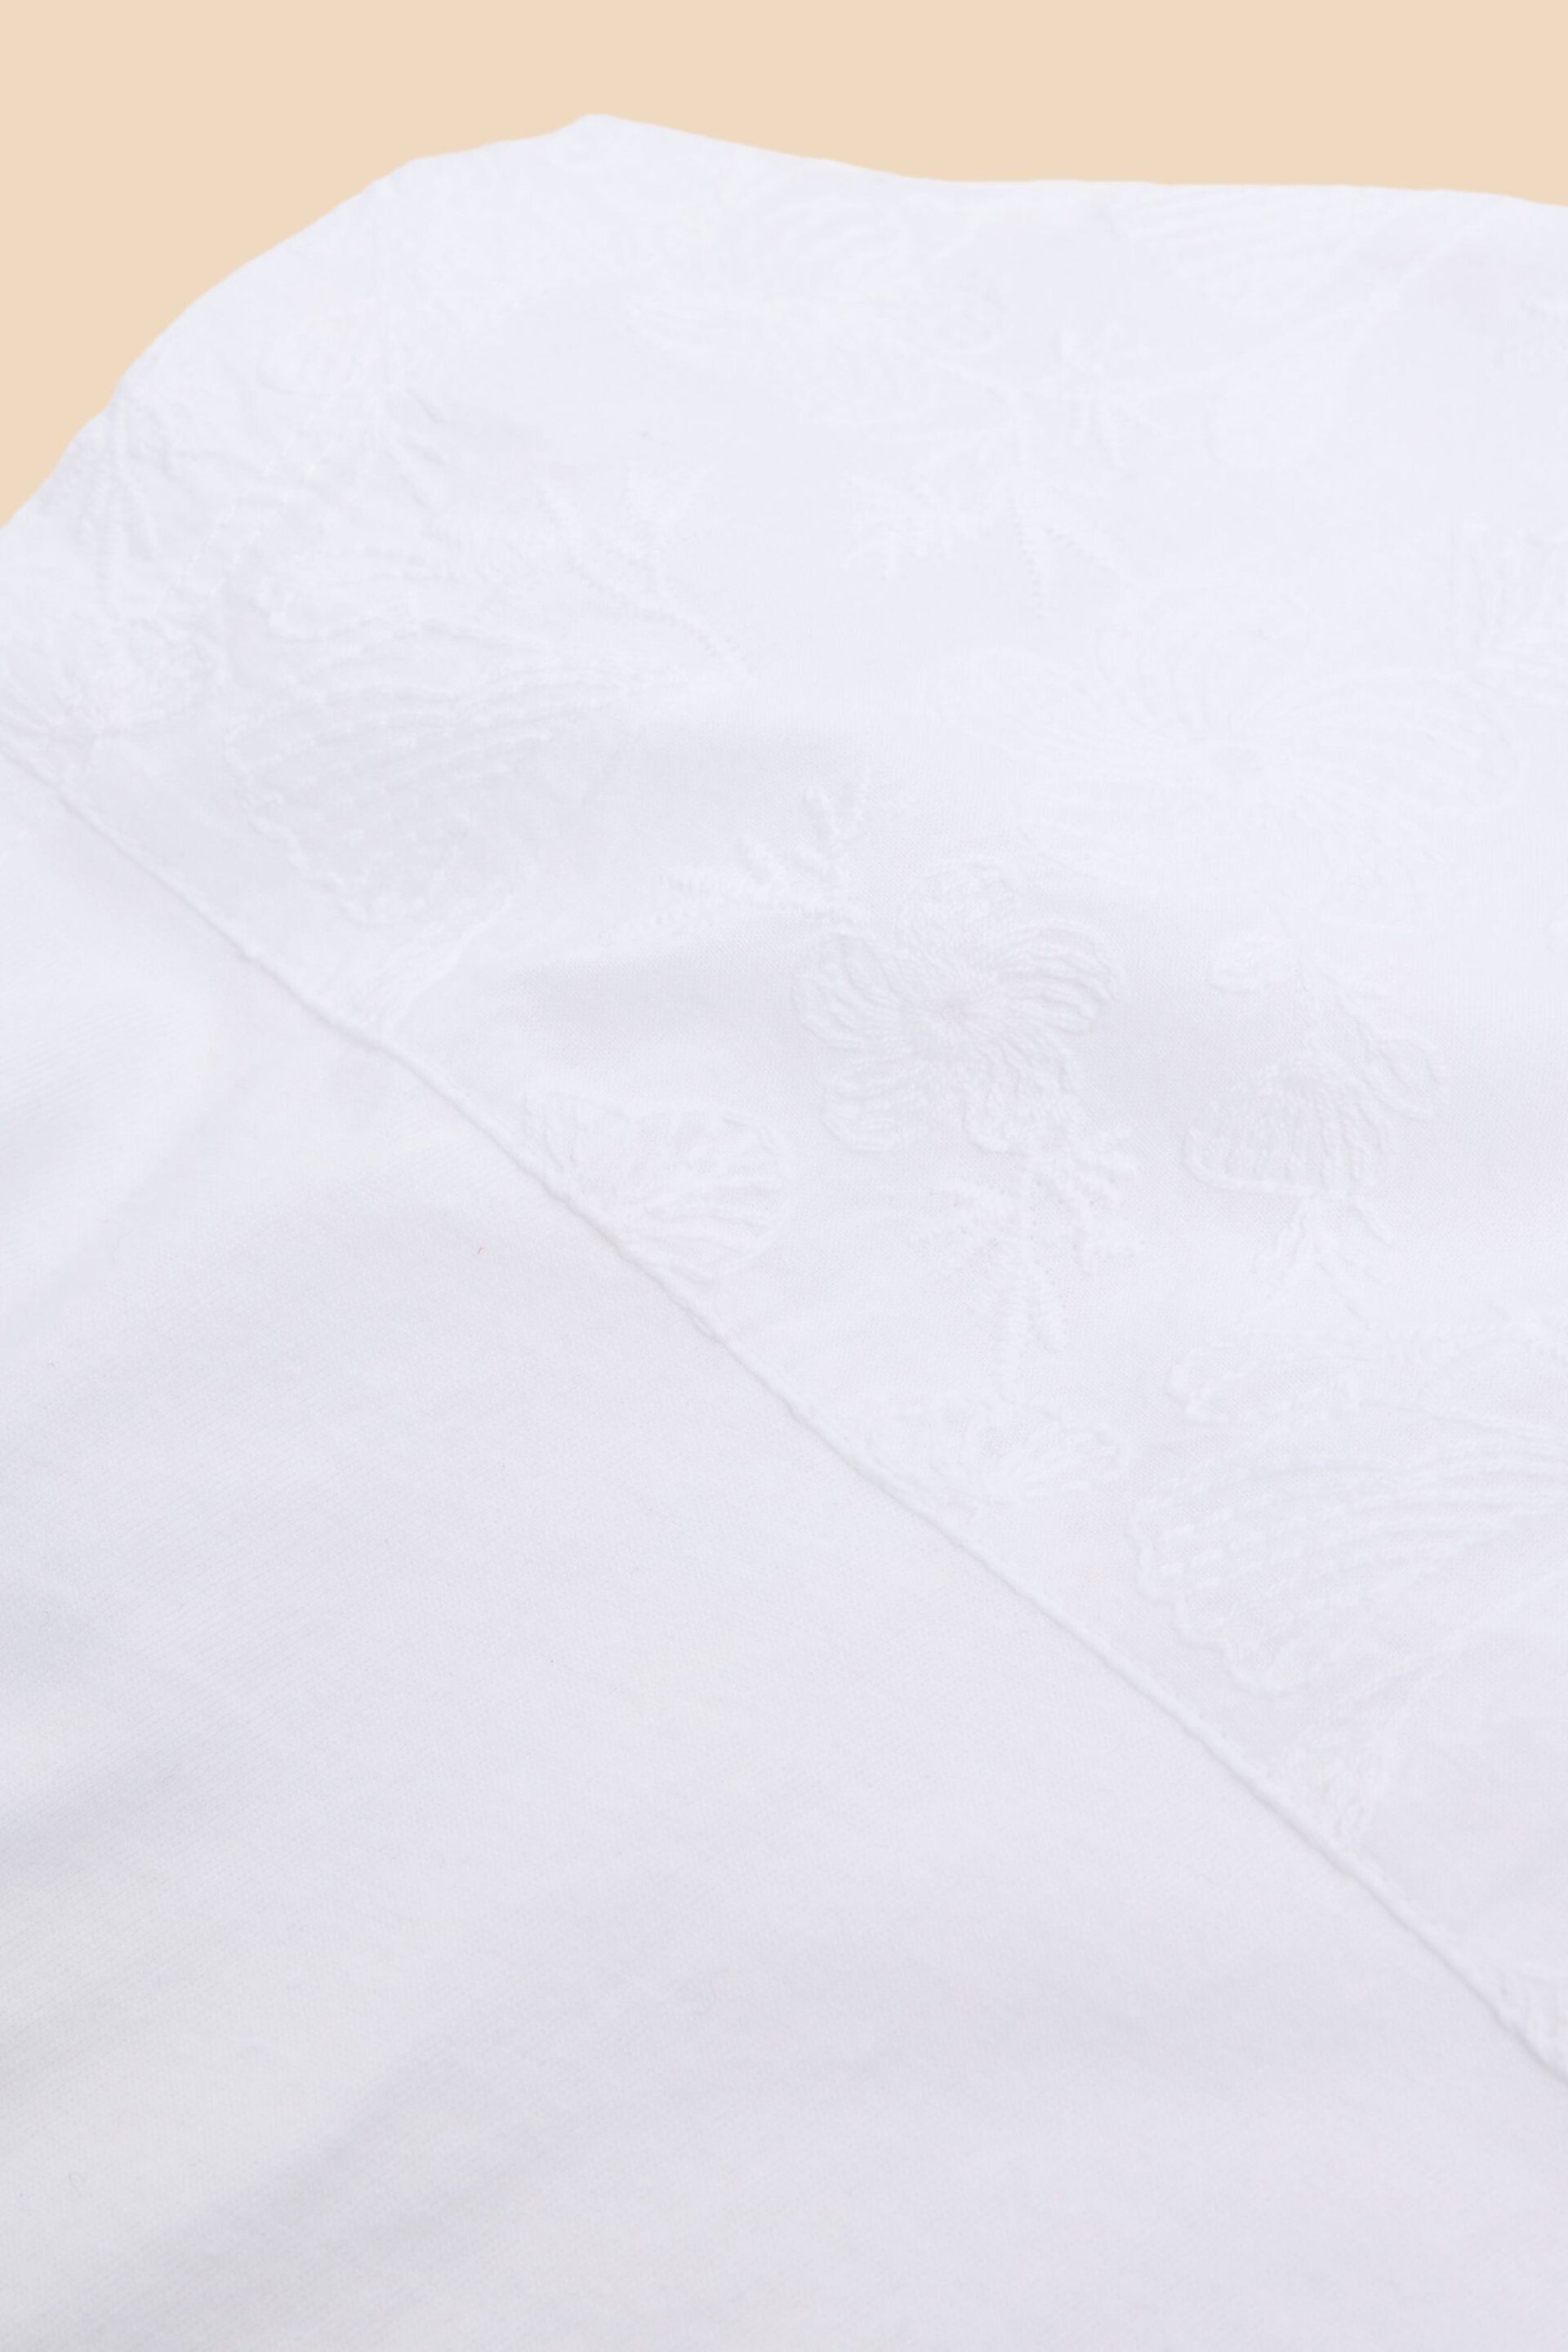 White Stuff White Embroidery Anthea Top - Image 7 of 7